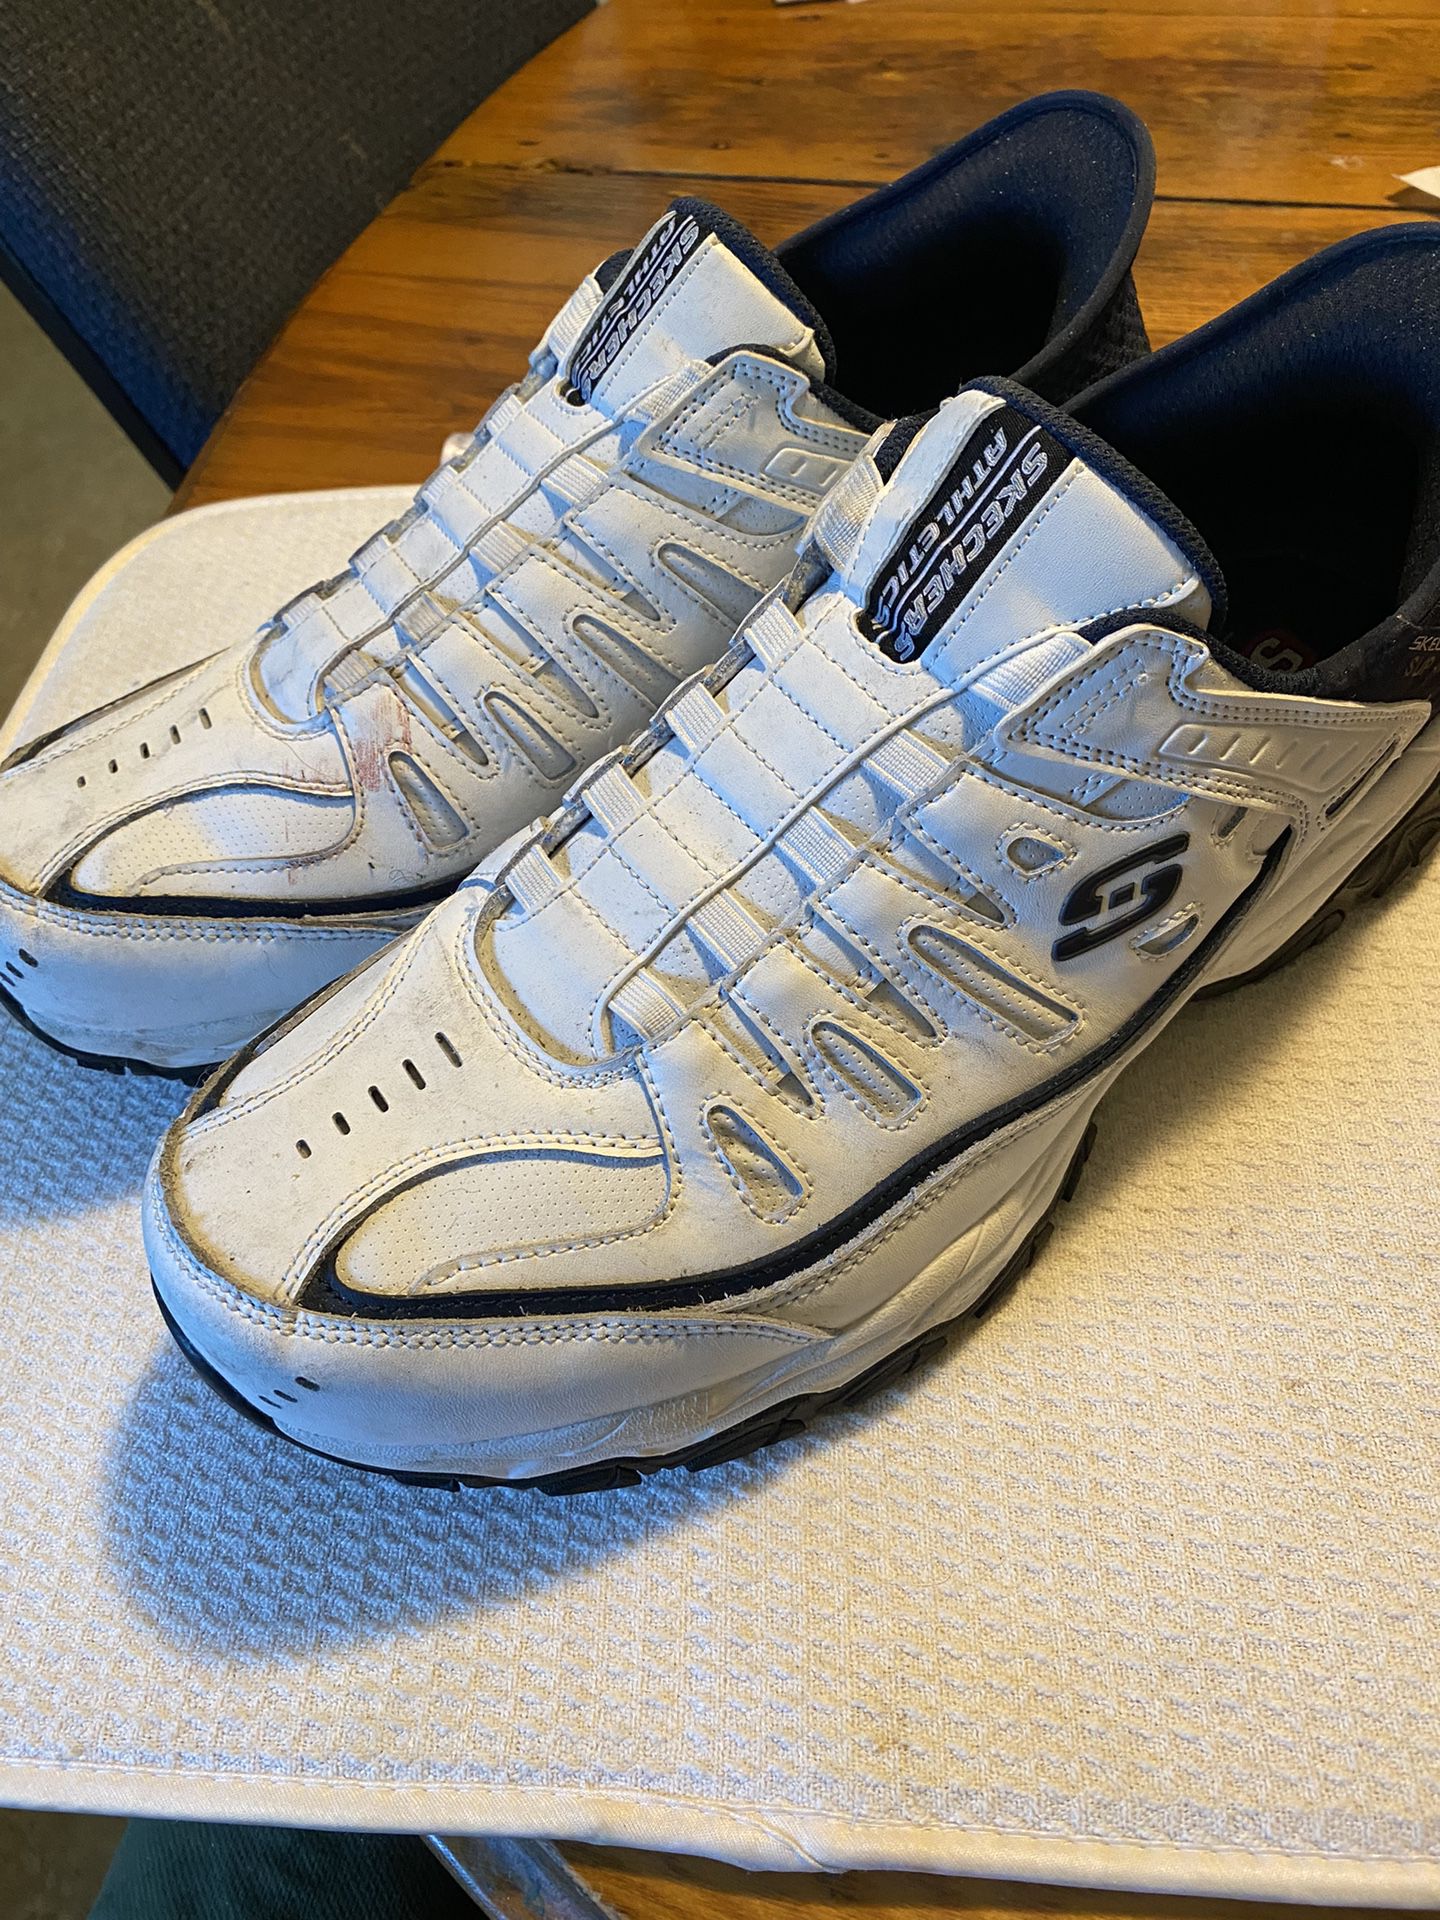 Pair Of Skechers  Size 14  Wide Sneakers ! Used 2 Times $20.00  Emmaus  area